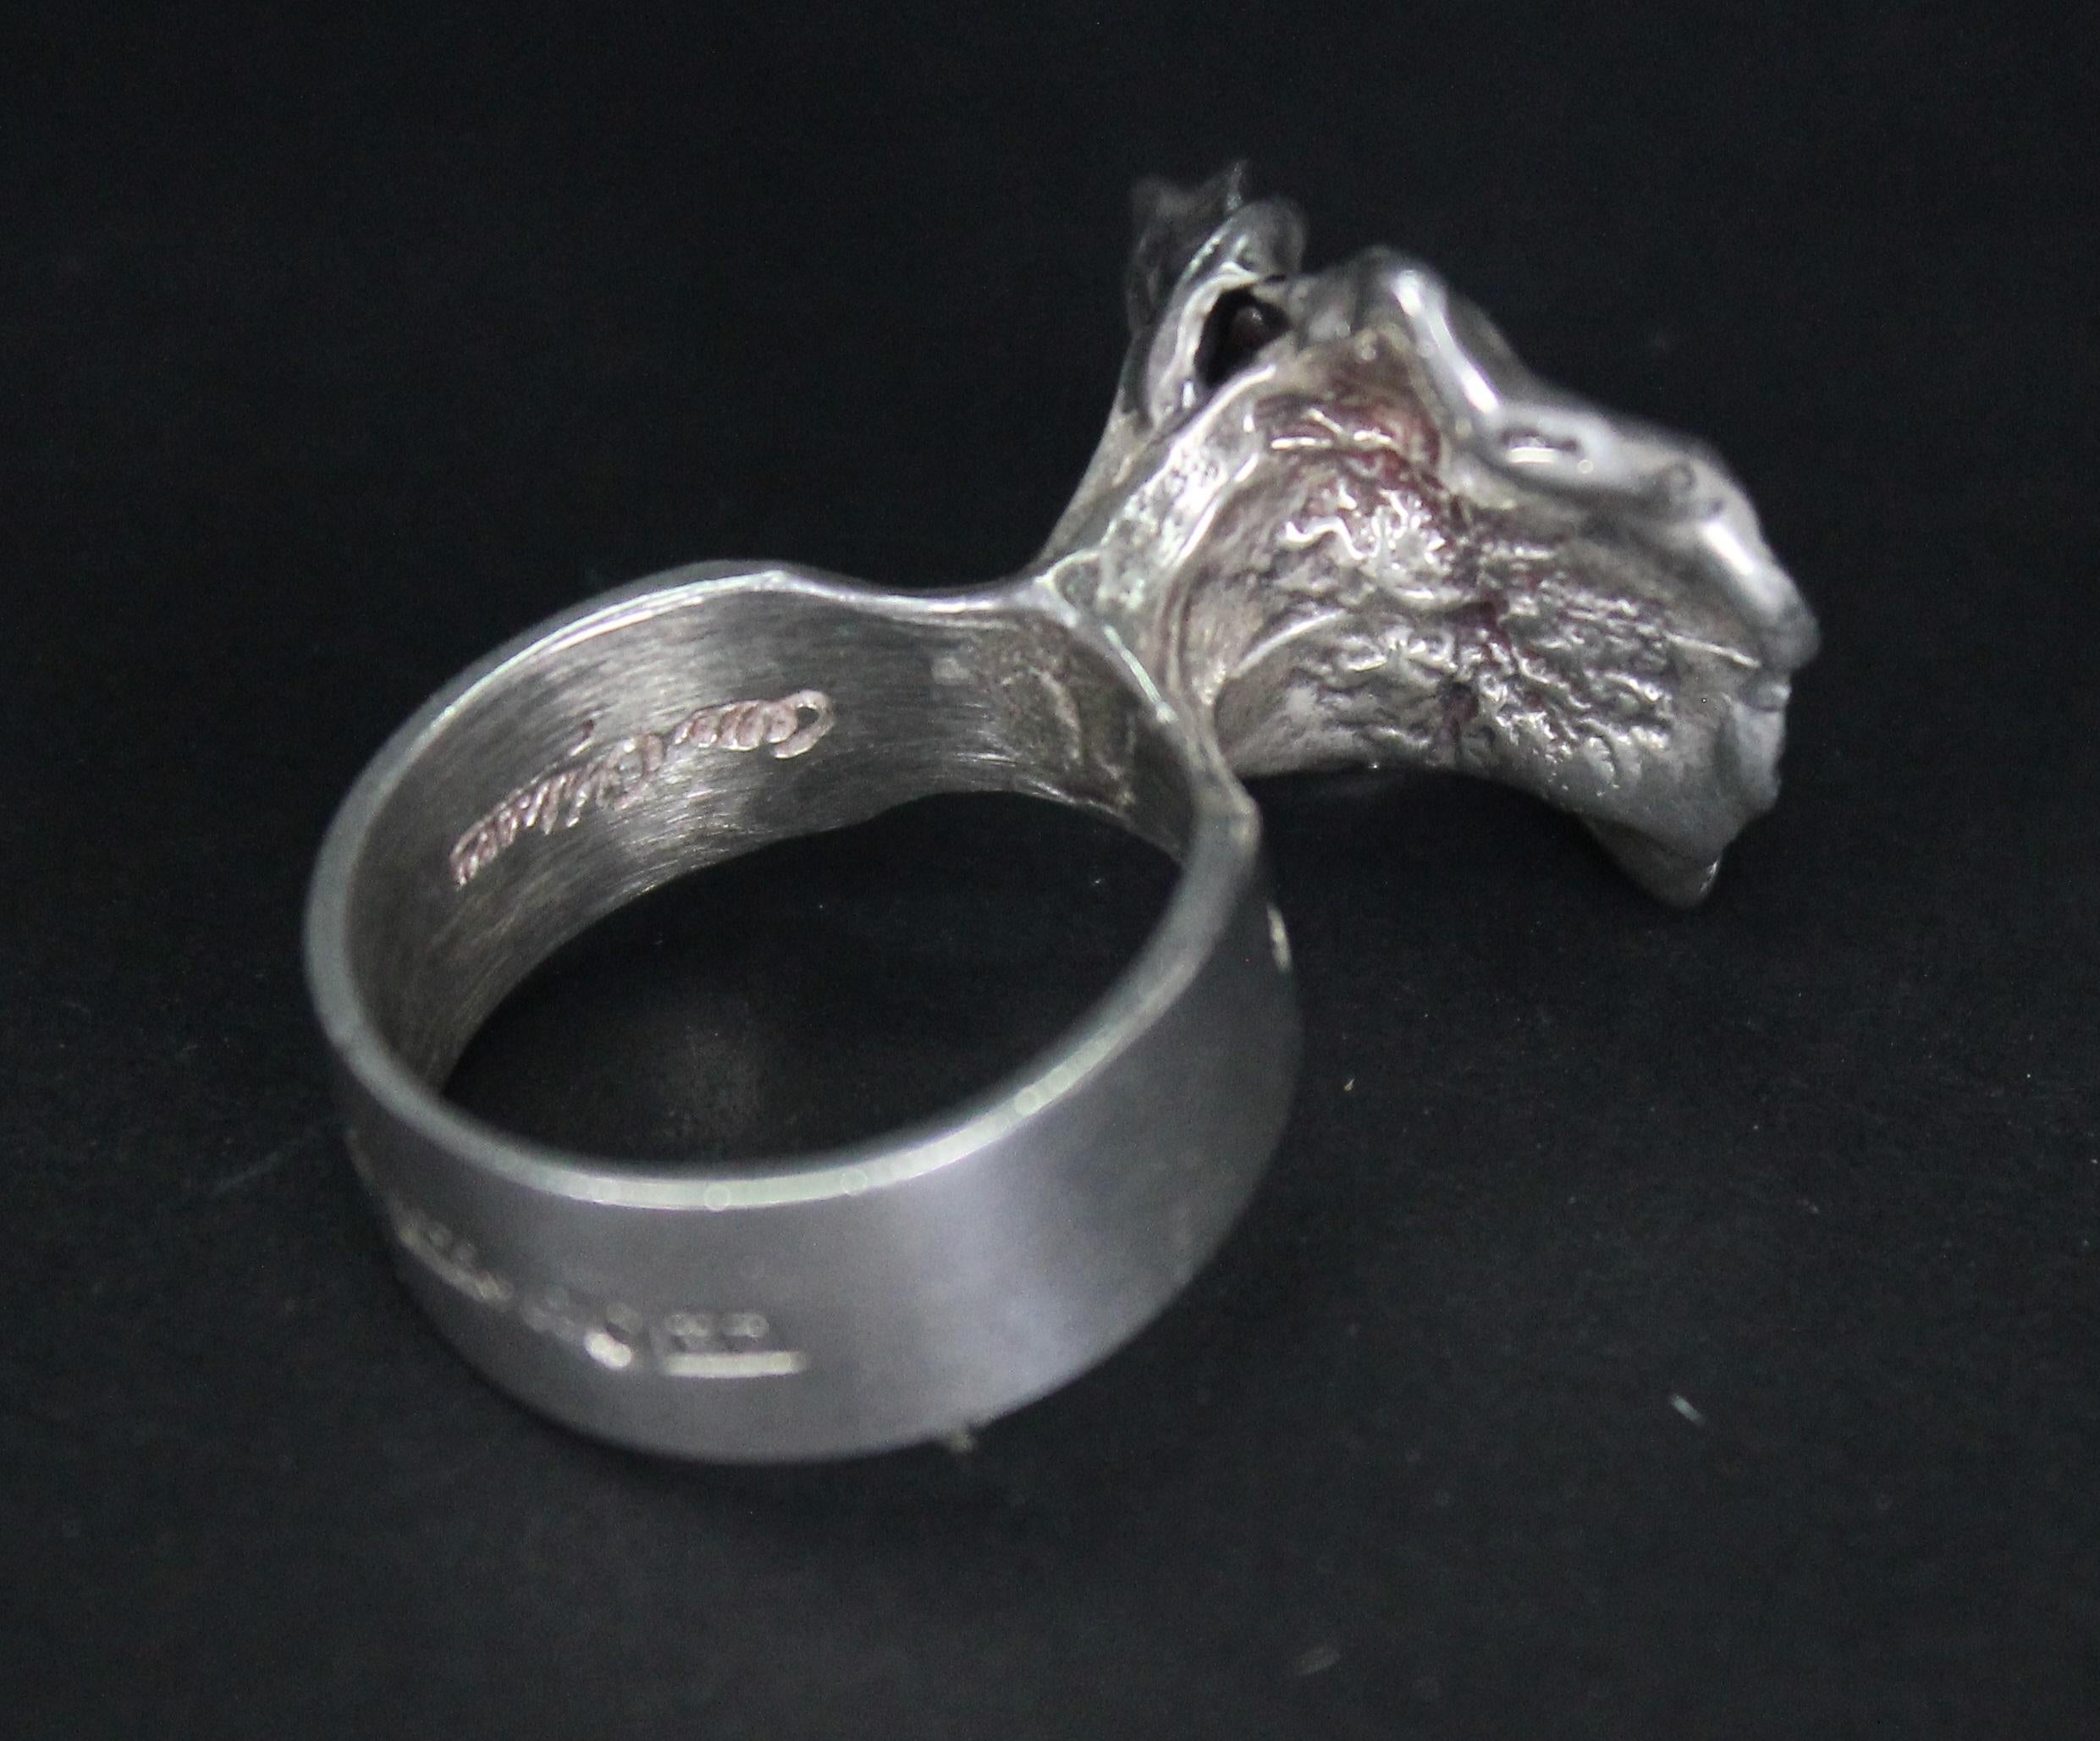 Ring size 16,5mm. US size 6. Very nice condition. No issues.

Olle Ohlsson is a Swedish silver- and goldsmith with a unique artistic expression that pushes limits. Trained as an artisan before studying to become an artist, he developed his own style